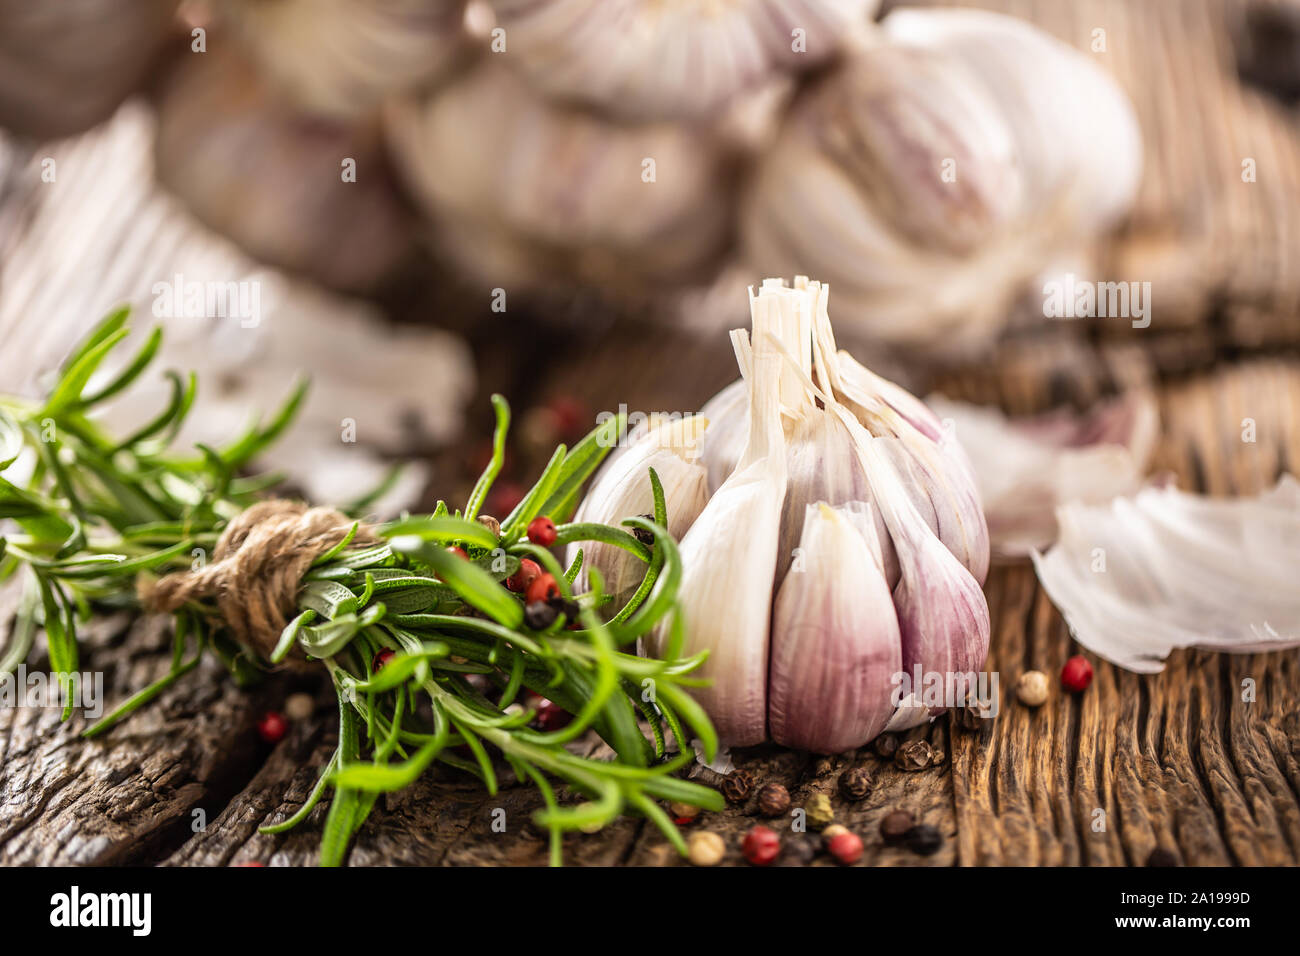 Garlic cloves bulb with fresh rosemary and spices on old wooden table Stock Photo